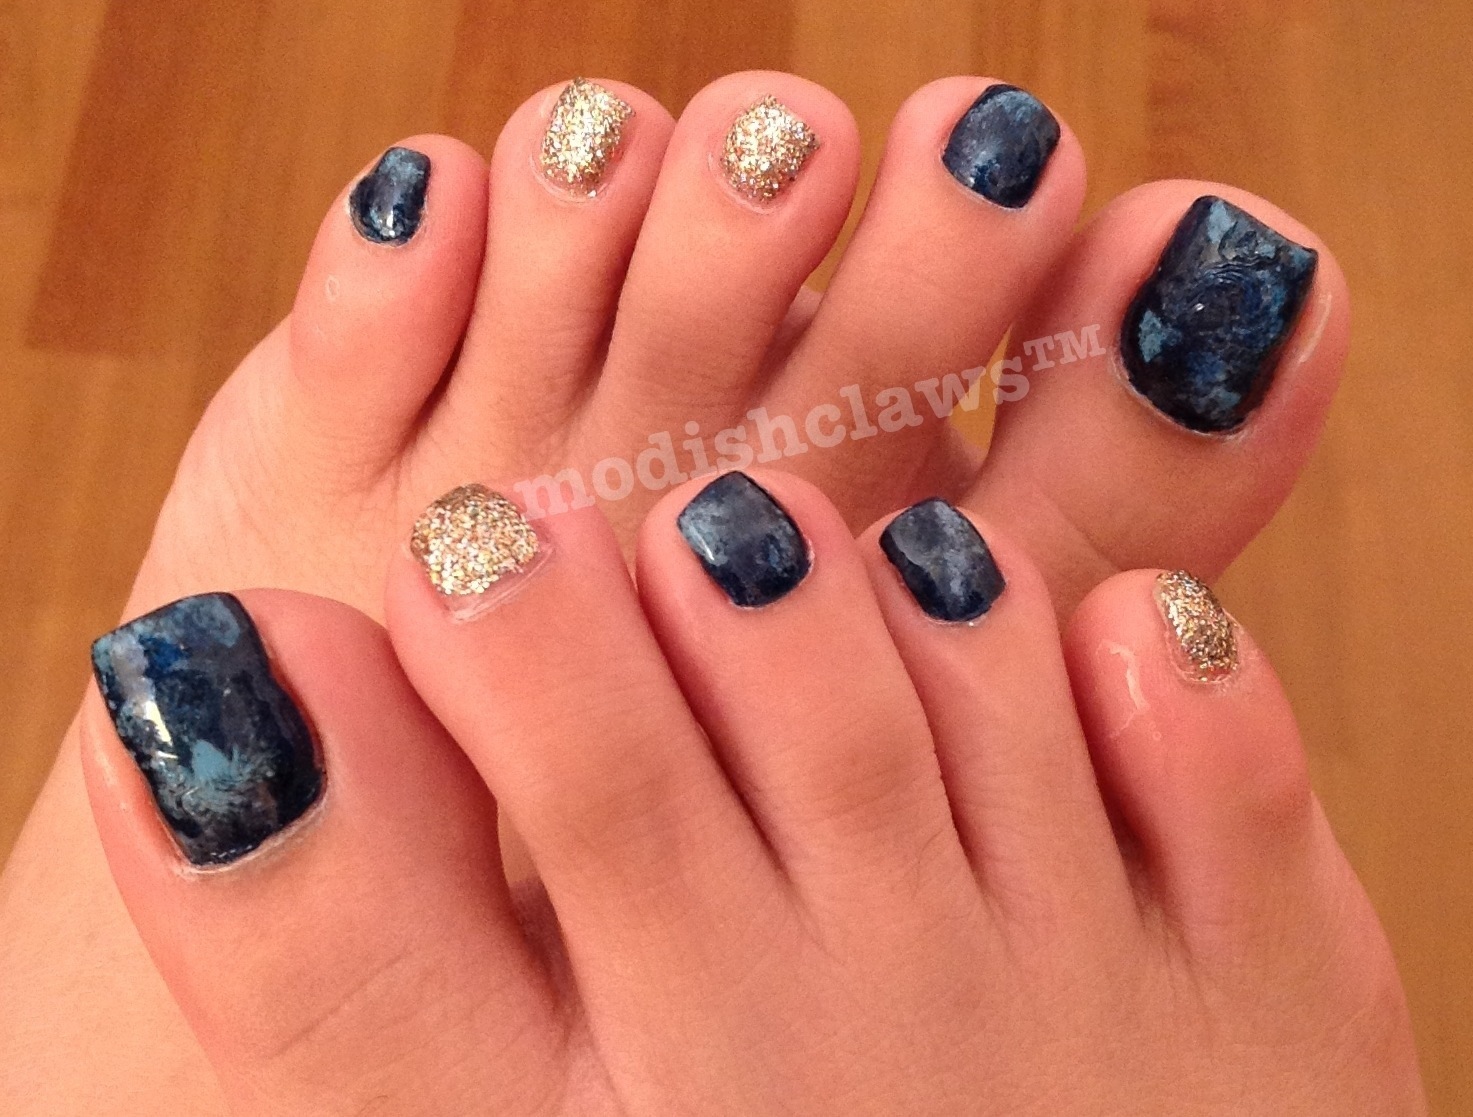 Here is my pedicure design. I smudged it a bit before it got dry. I 